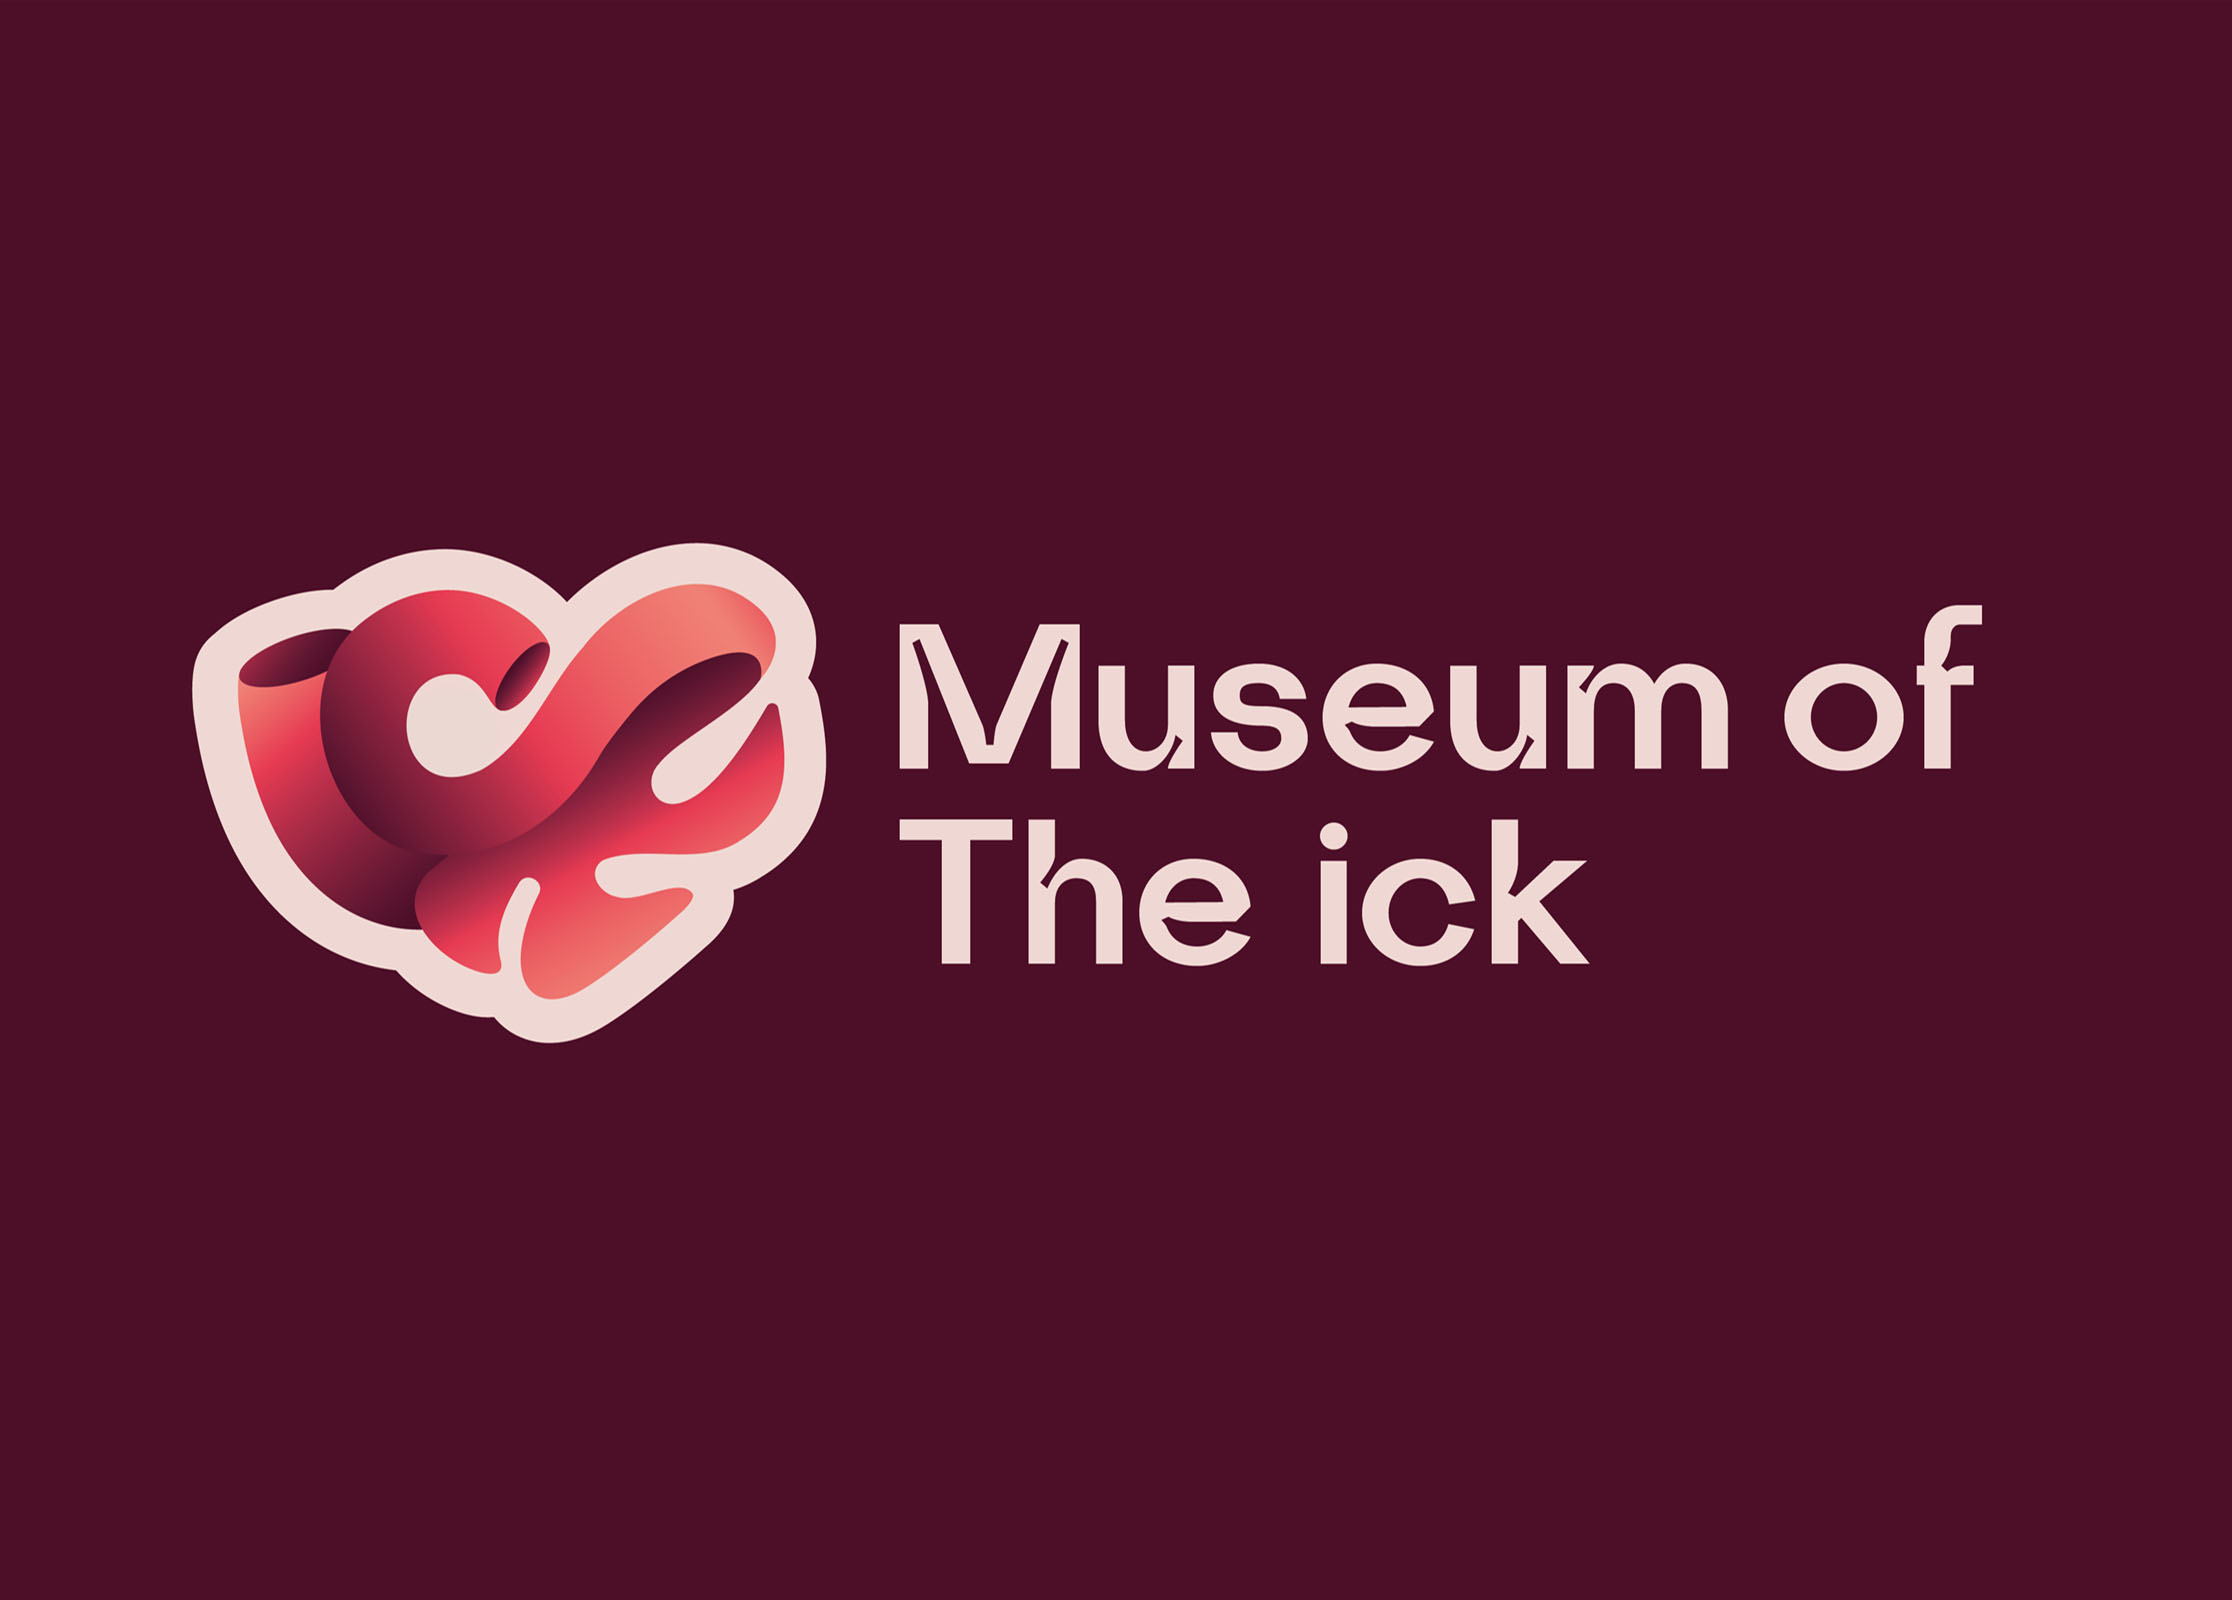 Logo design featuring an illustration of the word "ick" in the shape of a heart 